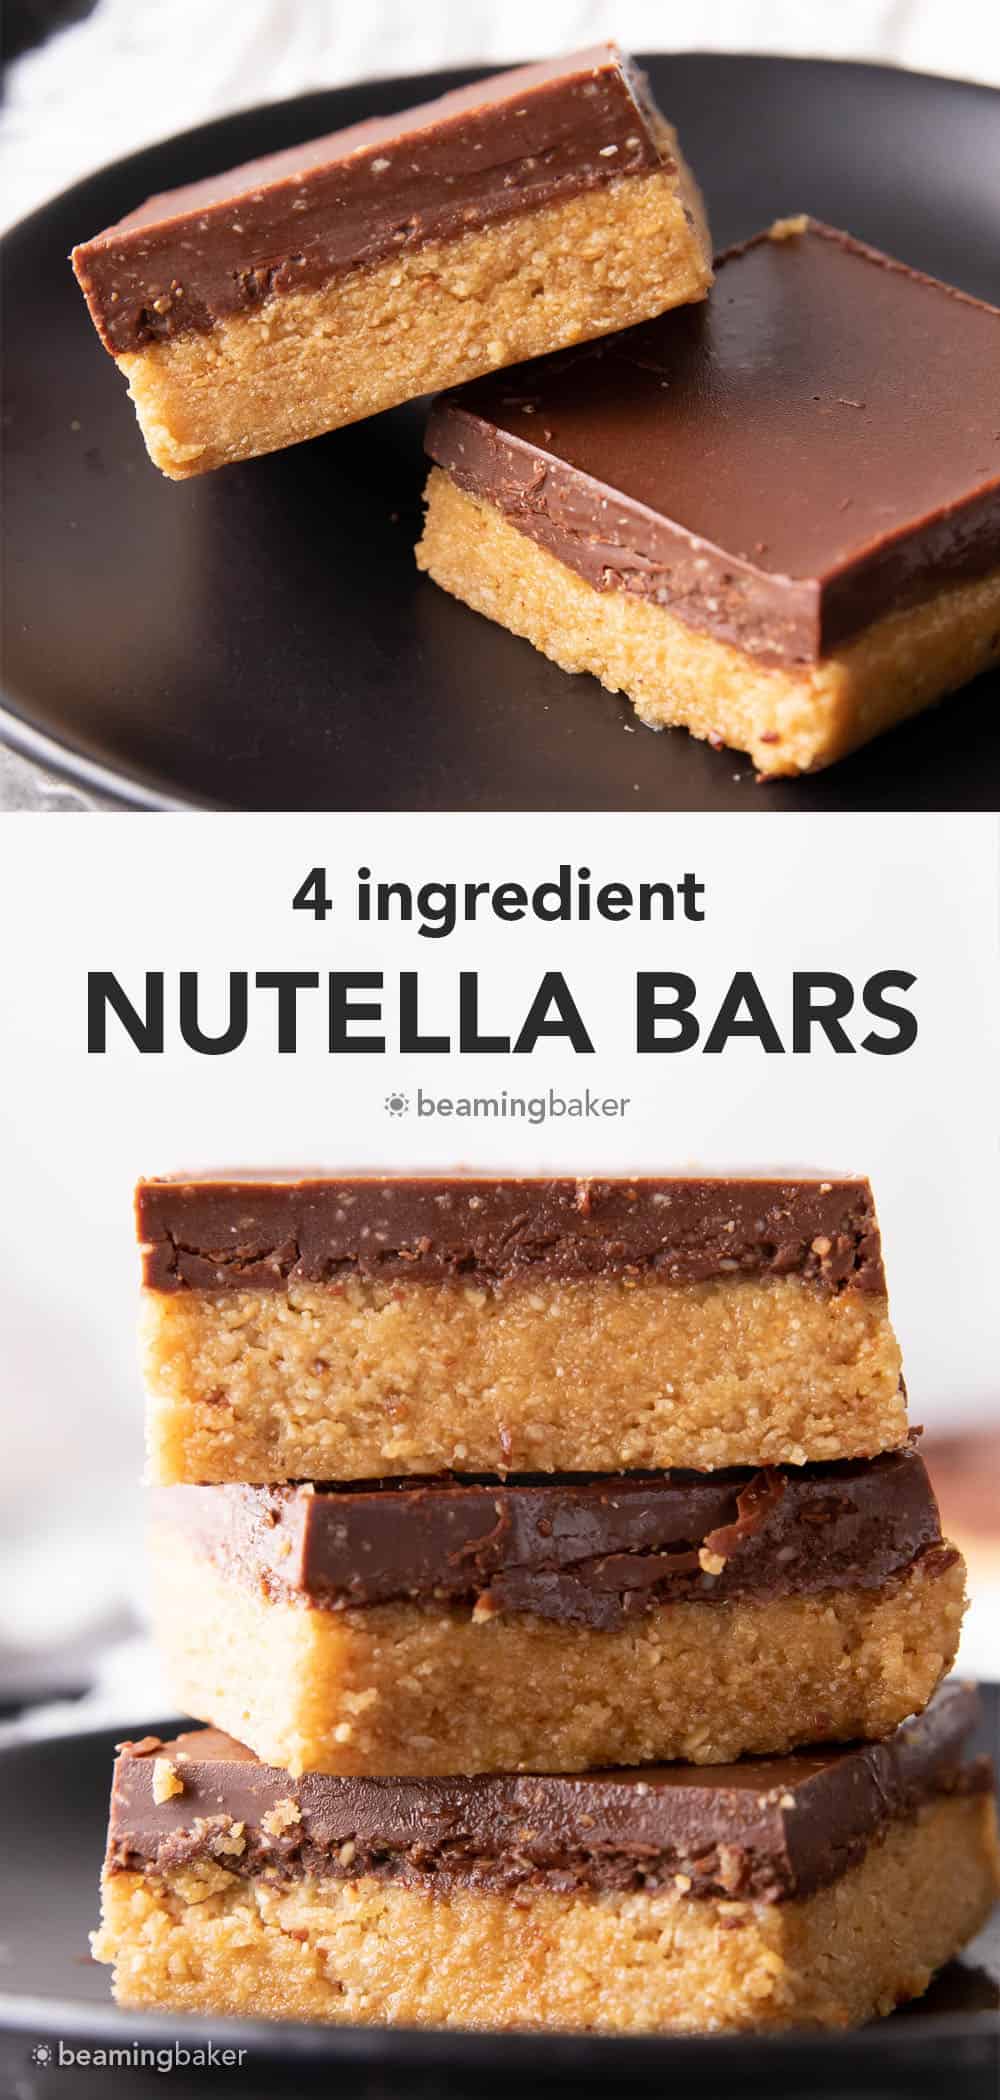 4 Ingredient No Bake Nutella Bars: this easy, 4 ingredient Nutella chocolate bar recipe yields soft ‘n chewy nutella bars with a thick chocolate hazelnut top. The best no bake nutella bars—Nutella in mouthwatering bar form! #Nutella #Chocolate #NoBake #Hazelnut | Recipe at BeamingBaker.com